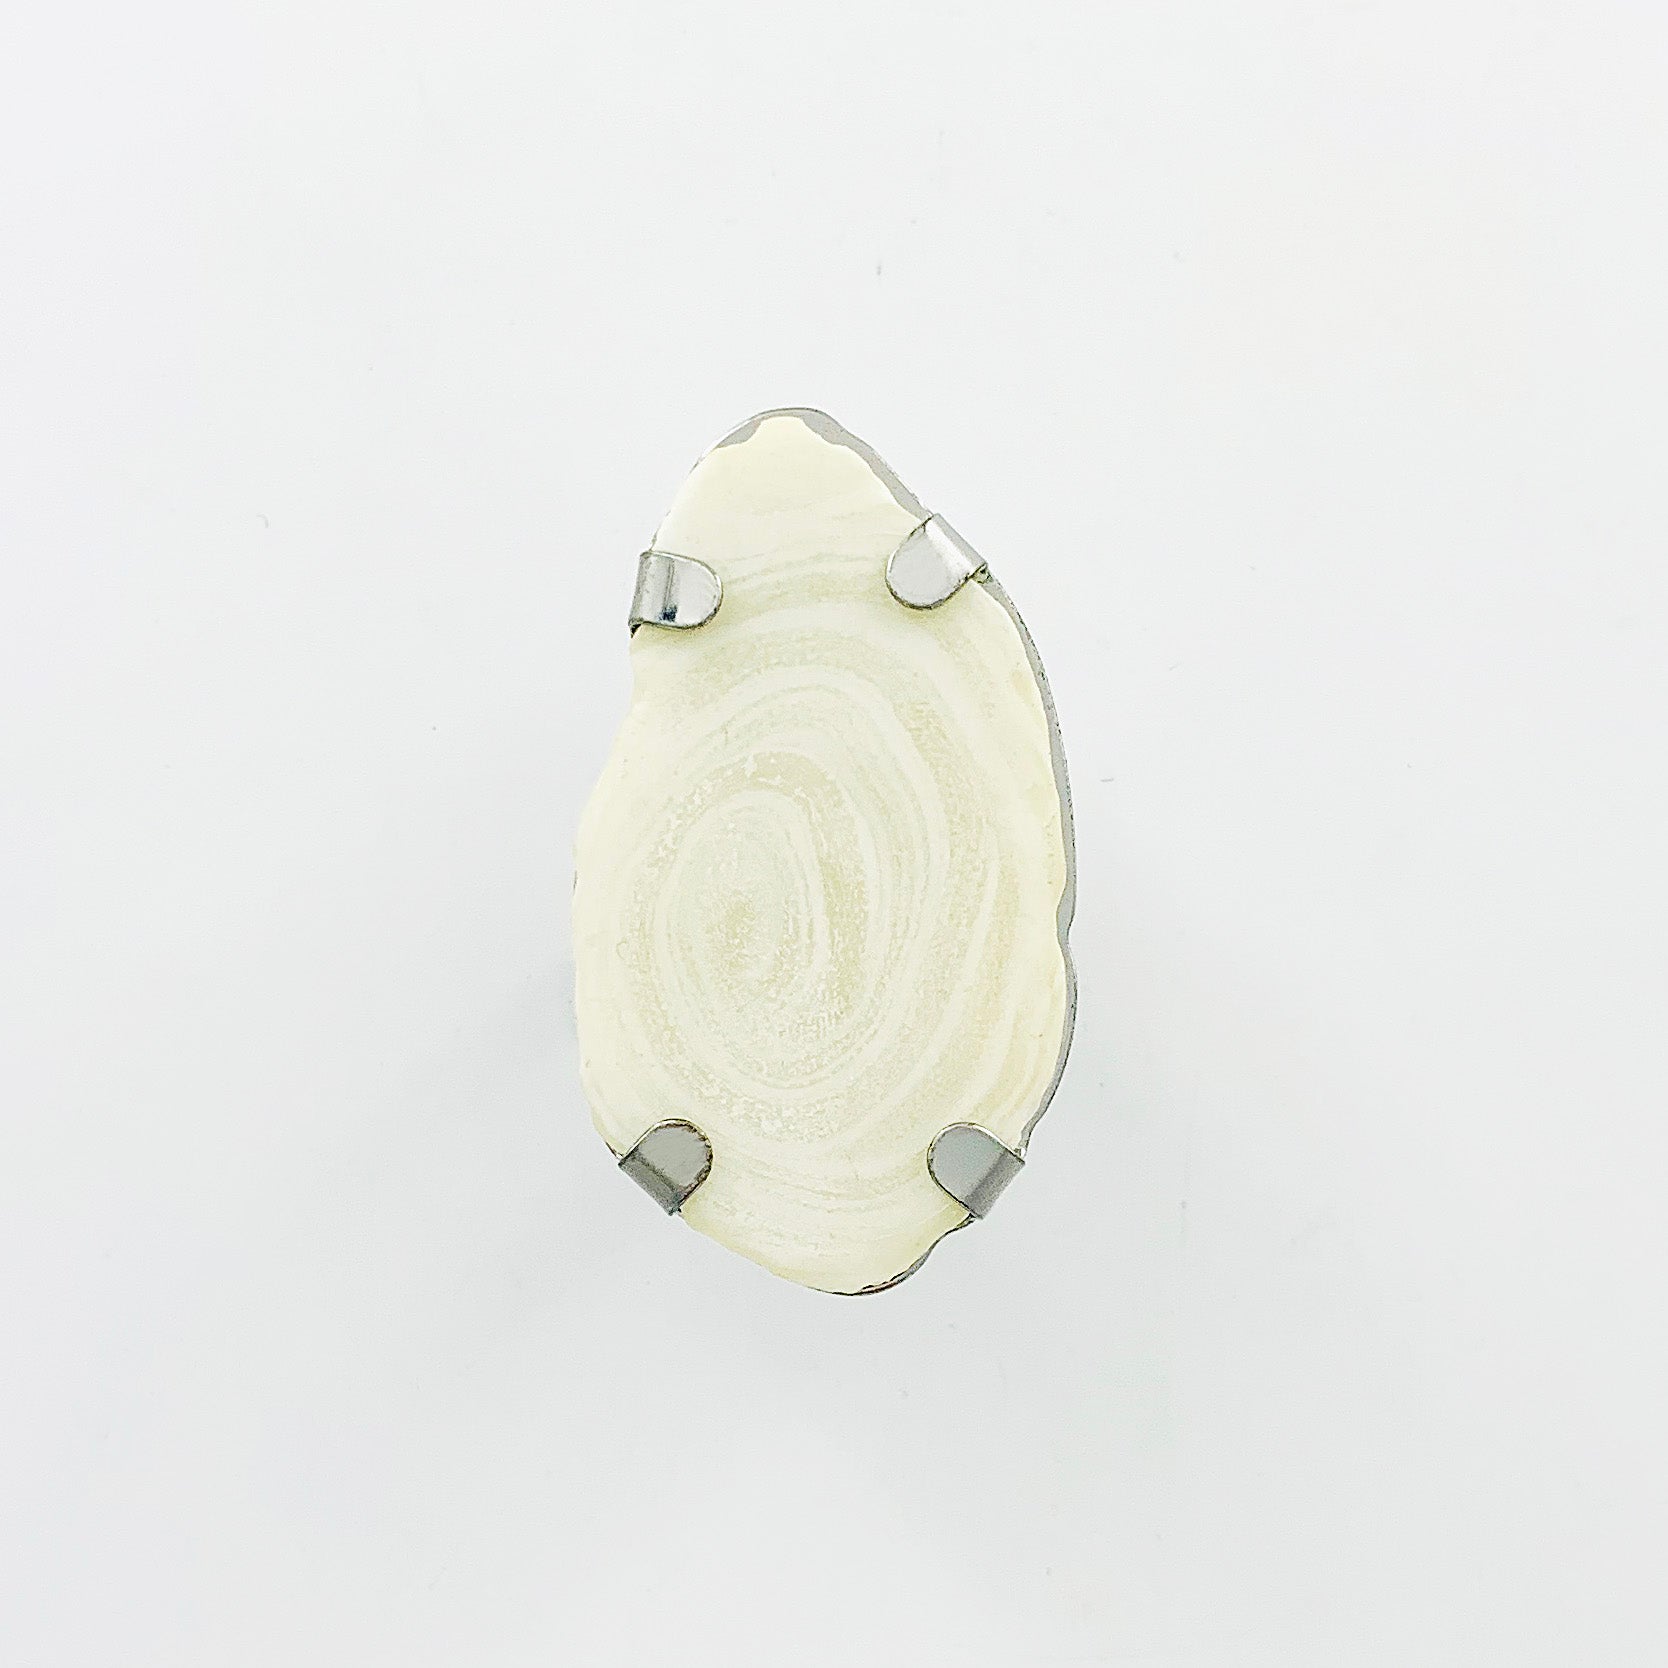 Silver ring with large white stone pendant